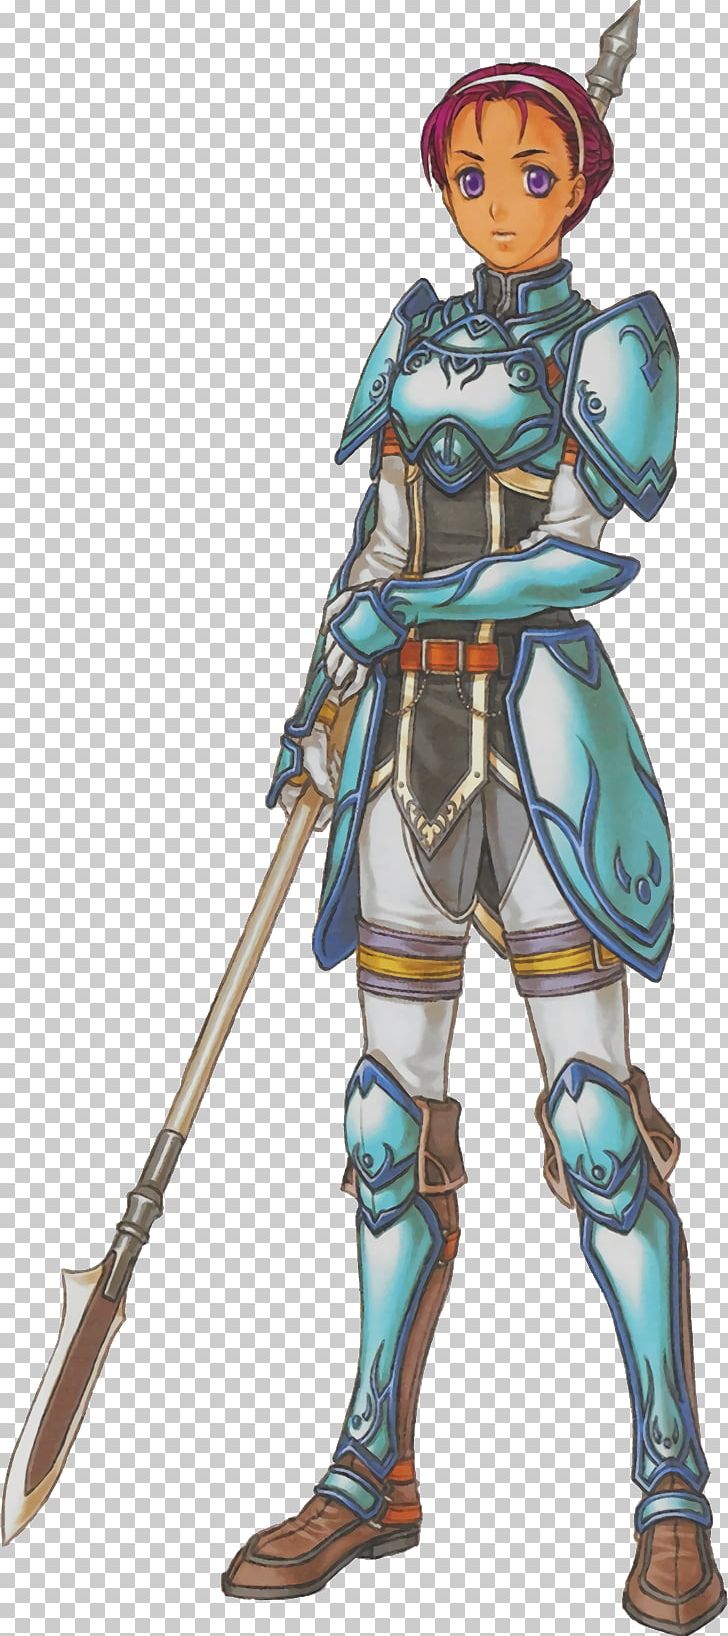 Fire Emblem: Radiant Dawn Fire Emblem: Path Of Radiance Fire Emblem Awakening Fire Emblem: Shadow Dragon PNG, Clipart, Armour, Cold Weapon, Costume, Costume Design, Dawn Free PNG Download